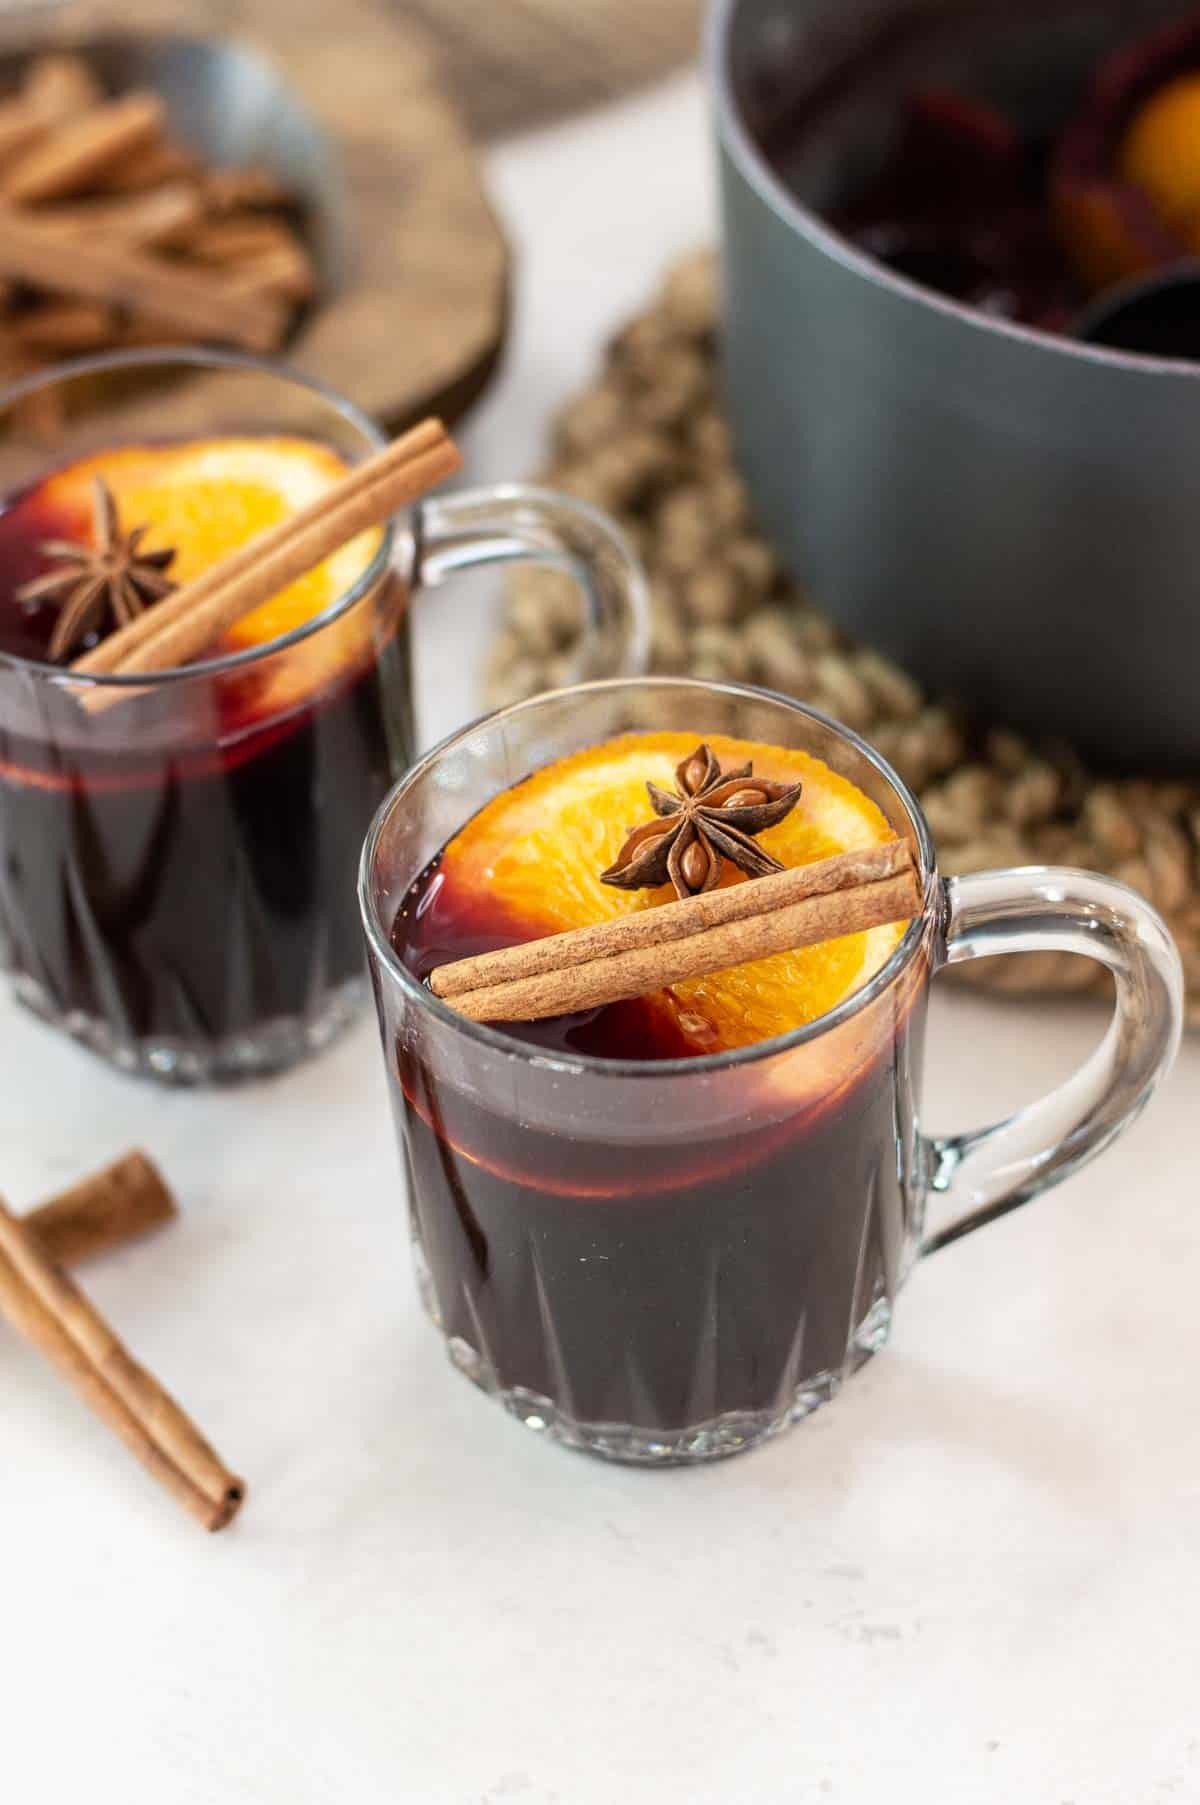 Mulled wine is a must at Christmas and here is how to make it at home